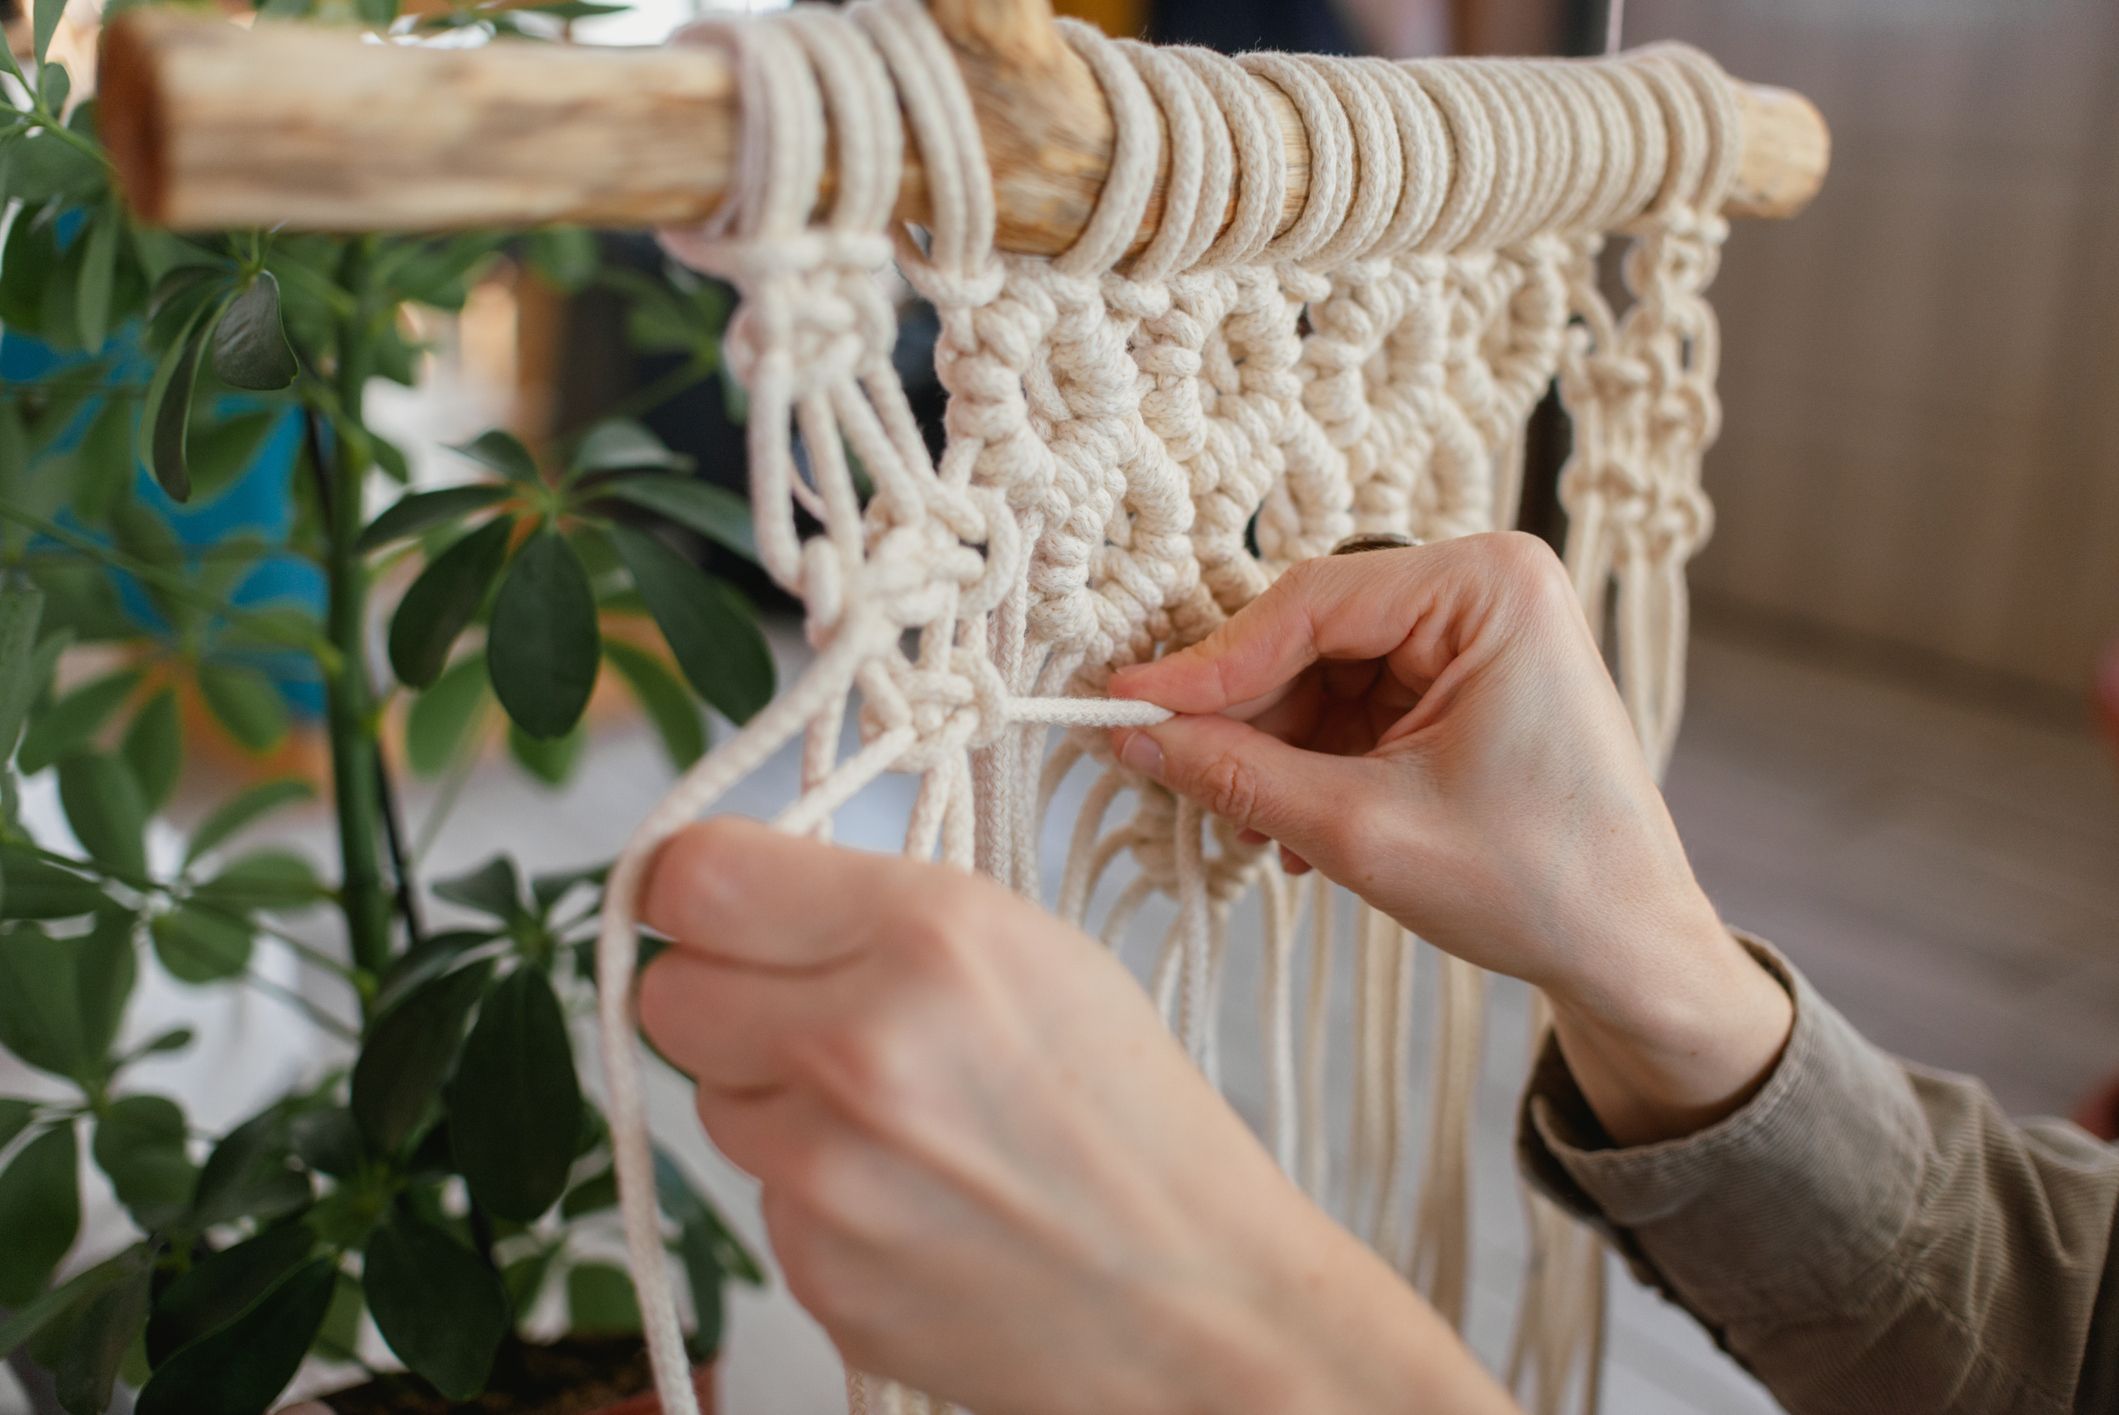 The Essential Macrame Book: Learn Knots, Bags, Patterns, and